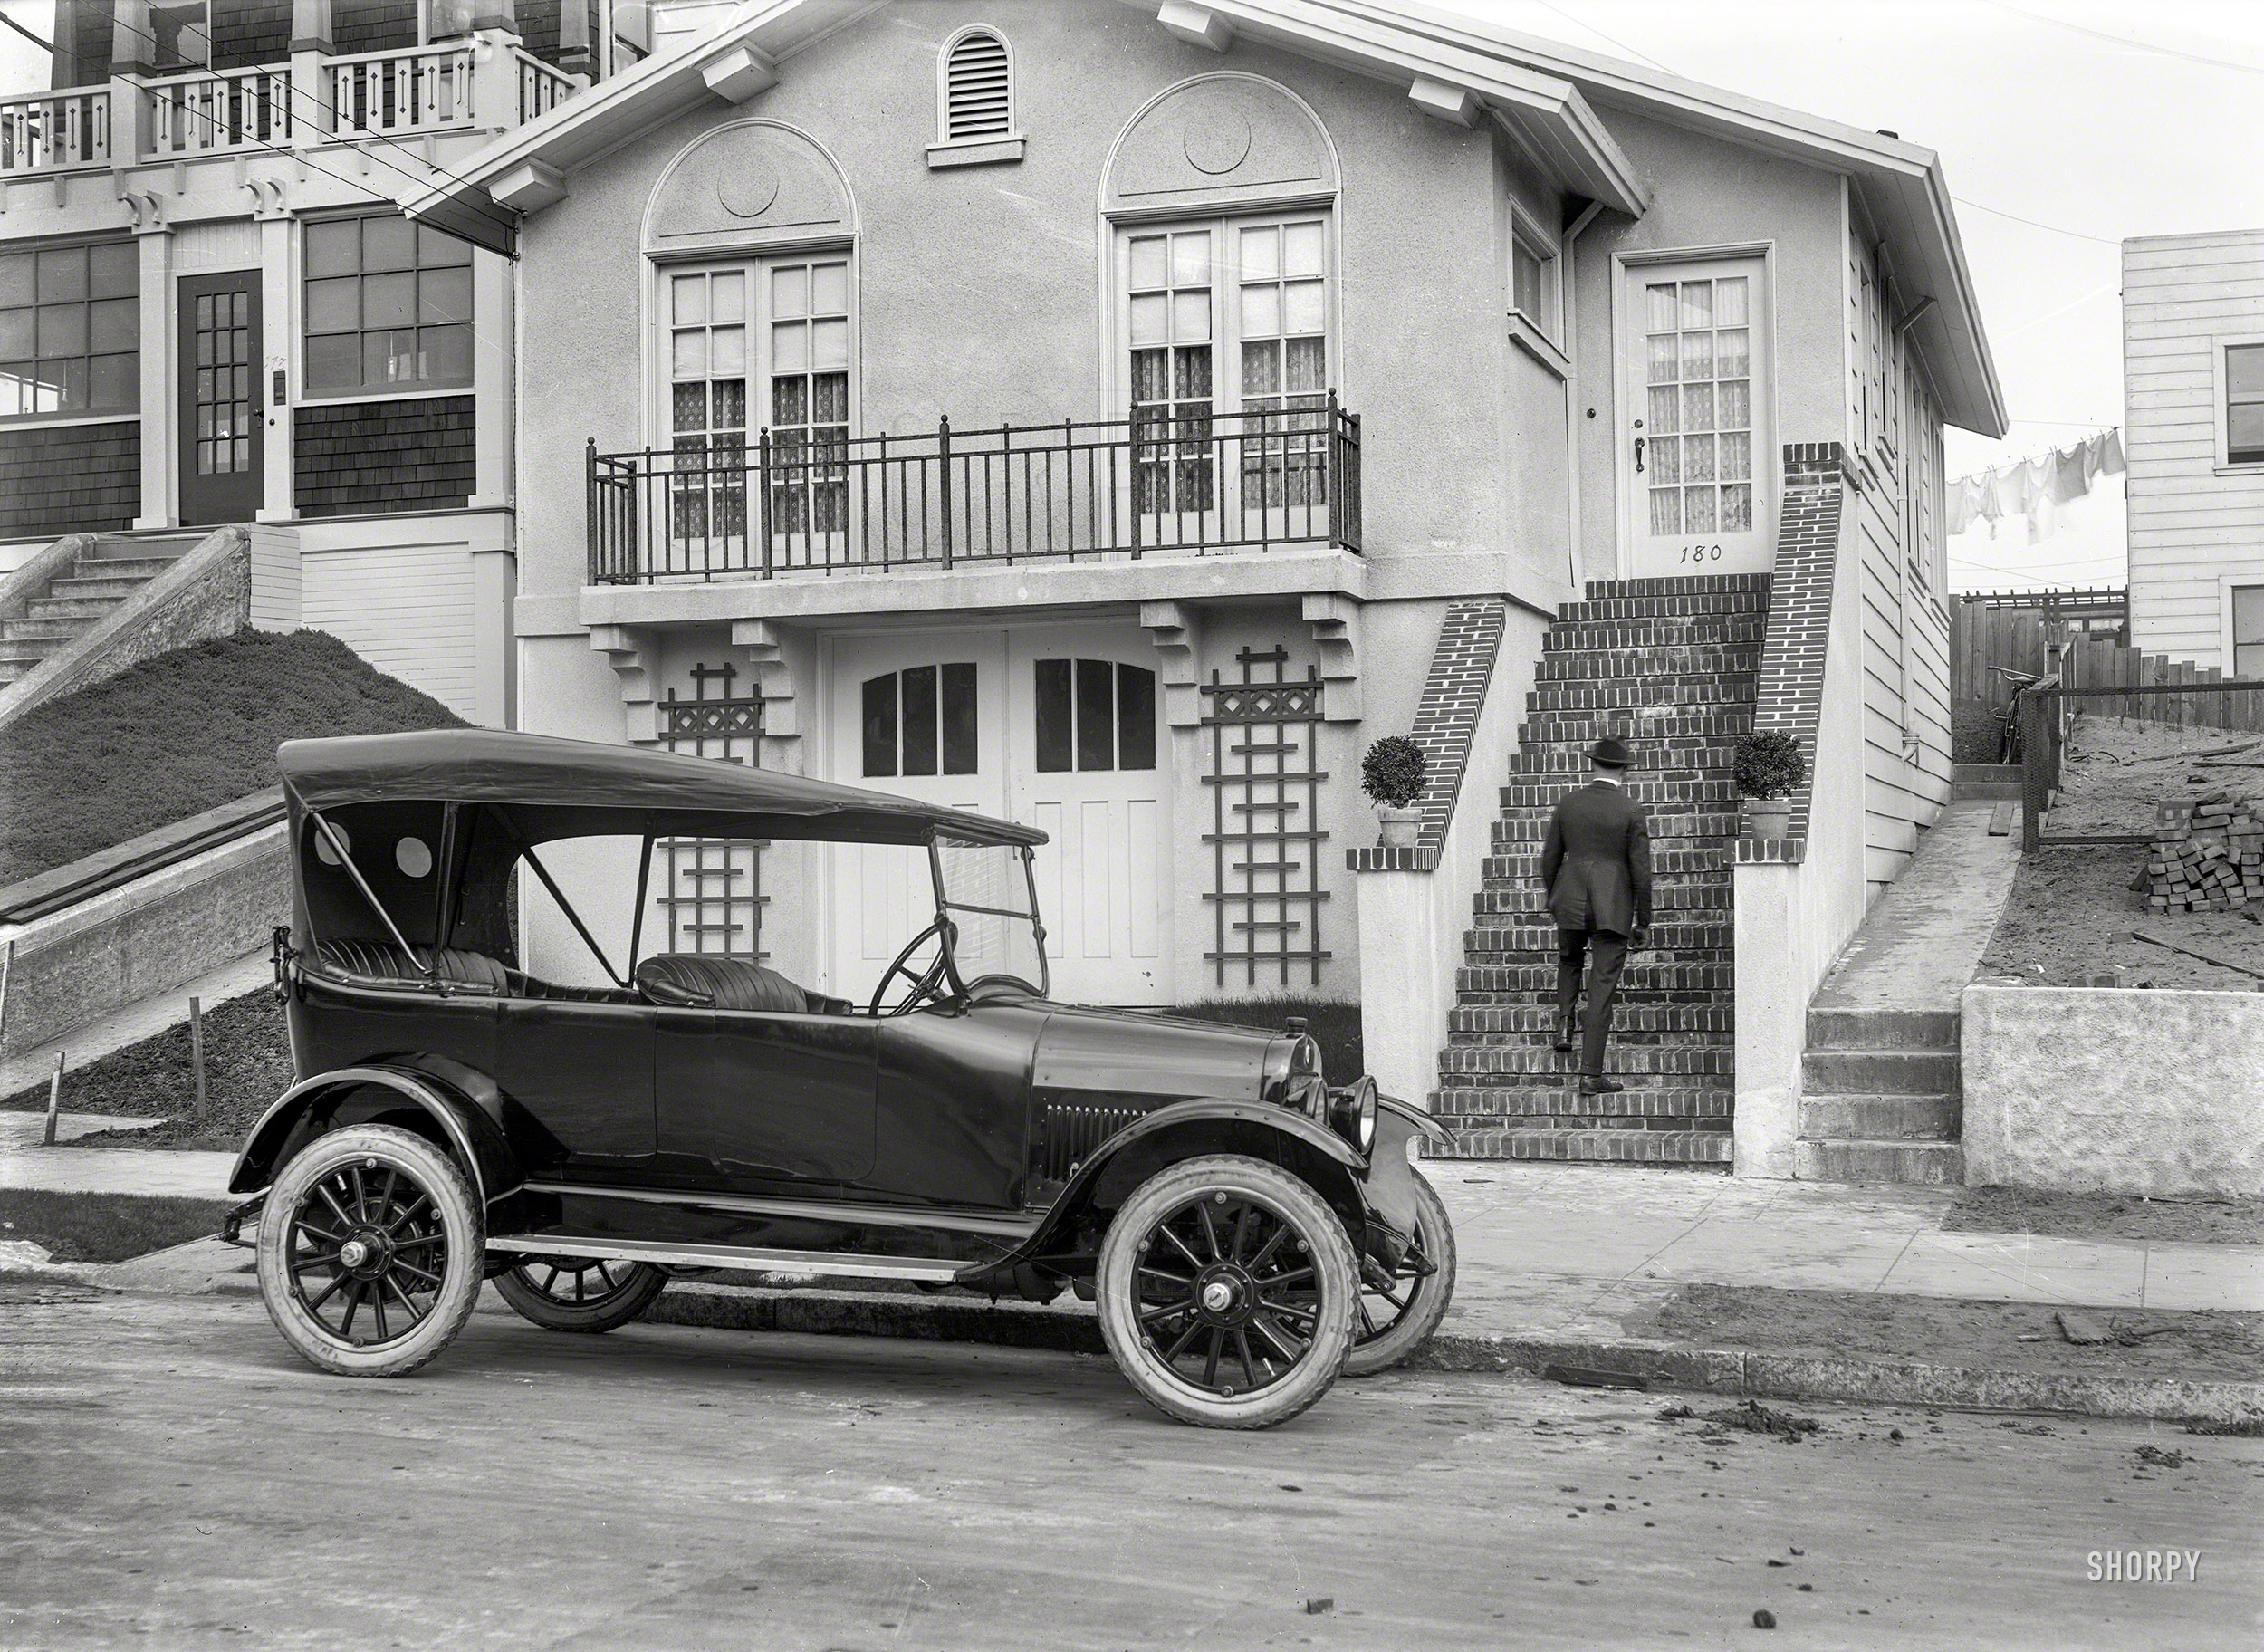 San Francisco, 1921. "Maxwell Model 25 touring sedan." Honey, whose horse was that blocking the garage? 5x7 glass negative by Chris Helin. View full size.